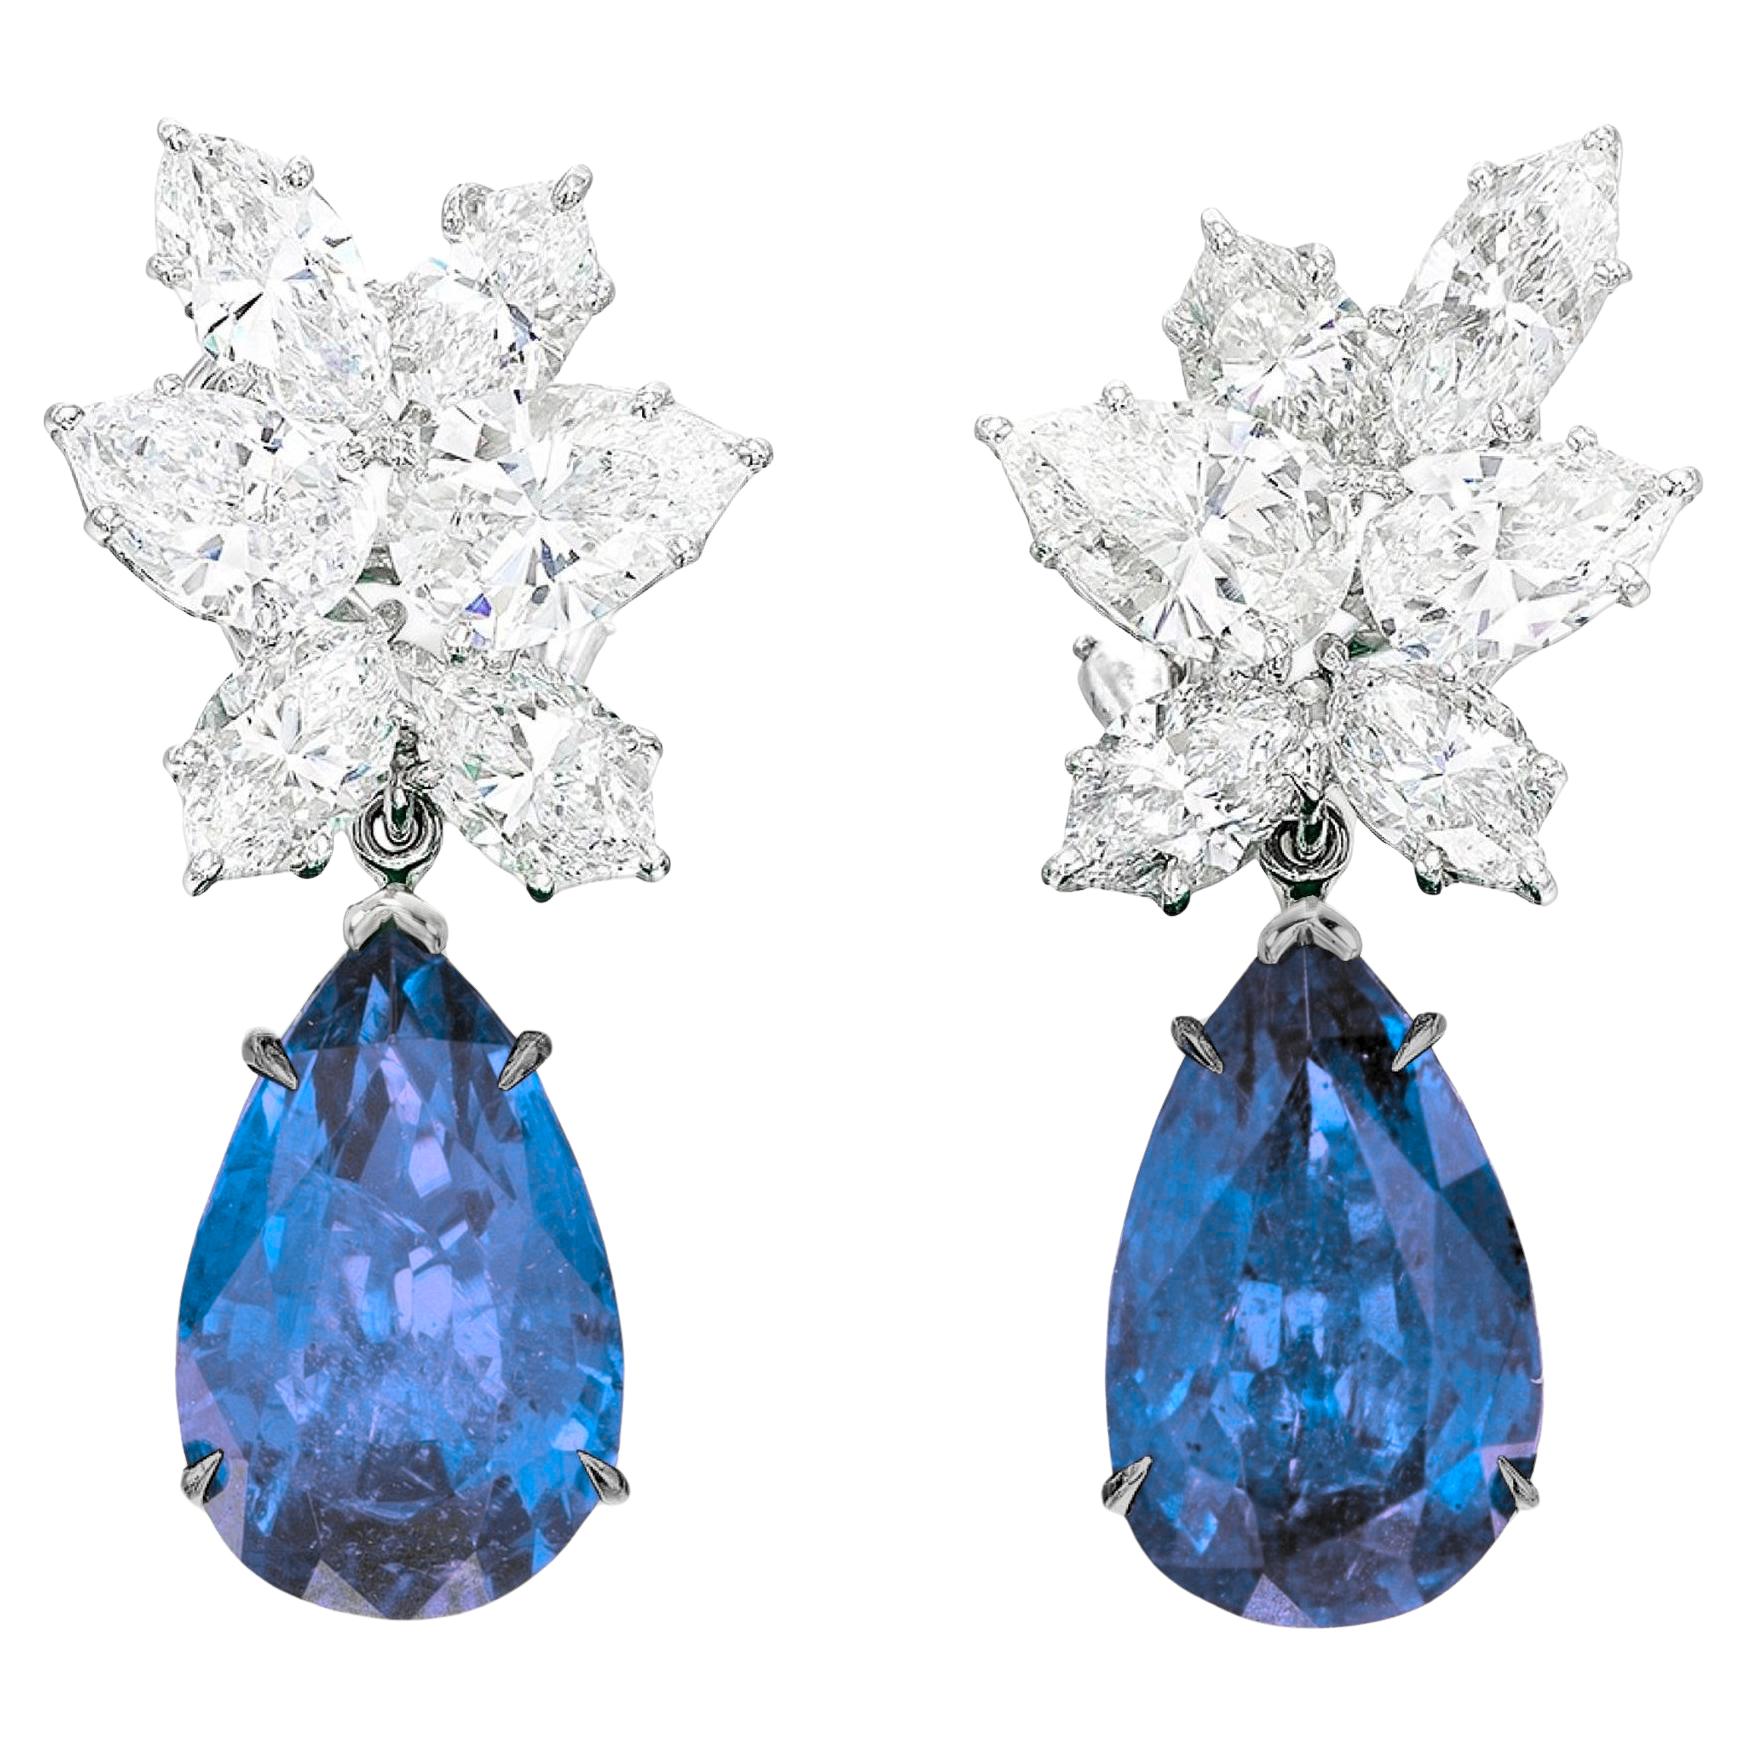 Elevate your jewelry collection with a pair of truly exceptional earrings meticulously crafted to fulfill the distinct preferences of our esteemed client, Louis. These bespoke earrings feature a dazzling duo of 6 Carat Vivid Blue Pear Shape